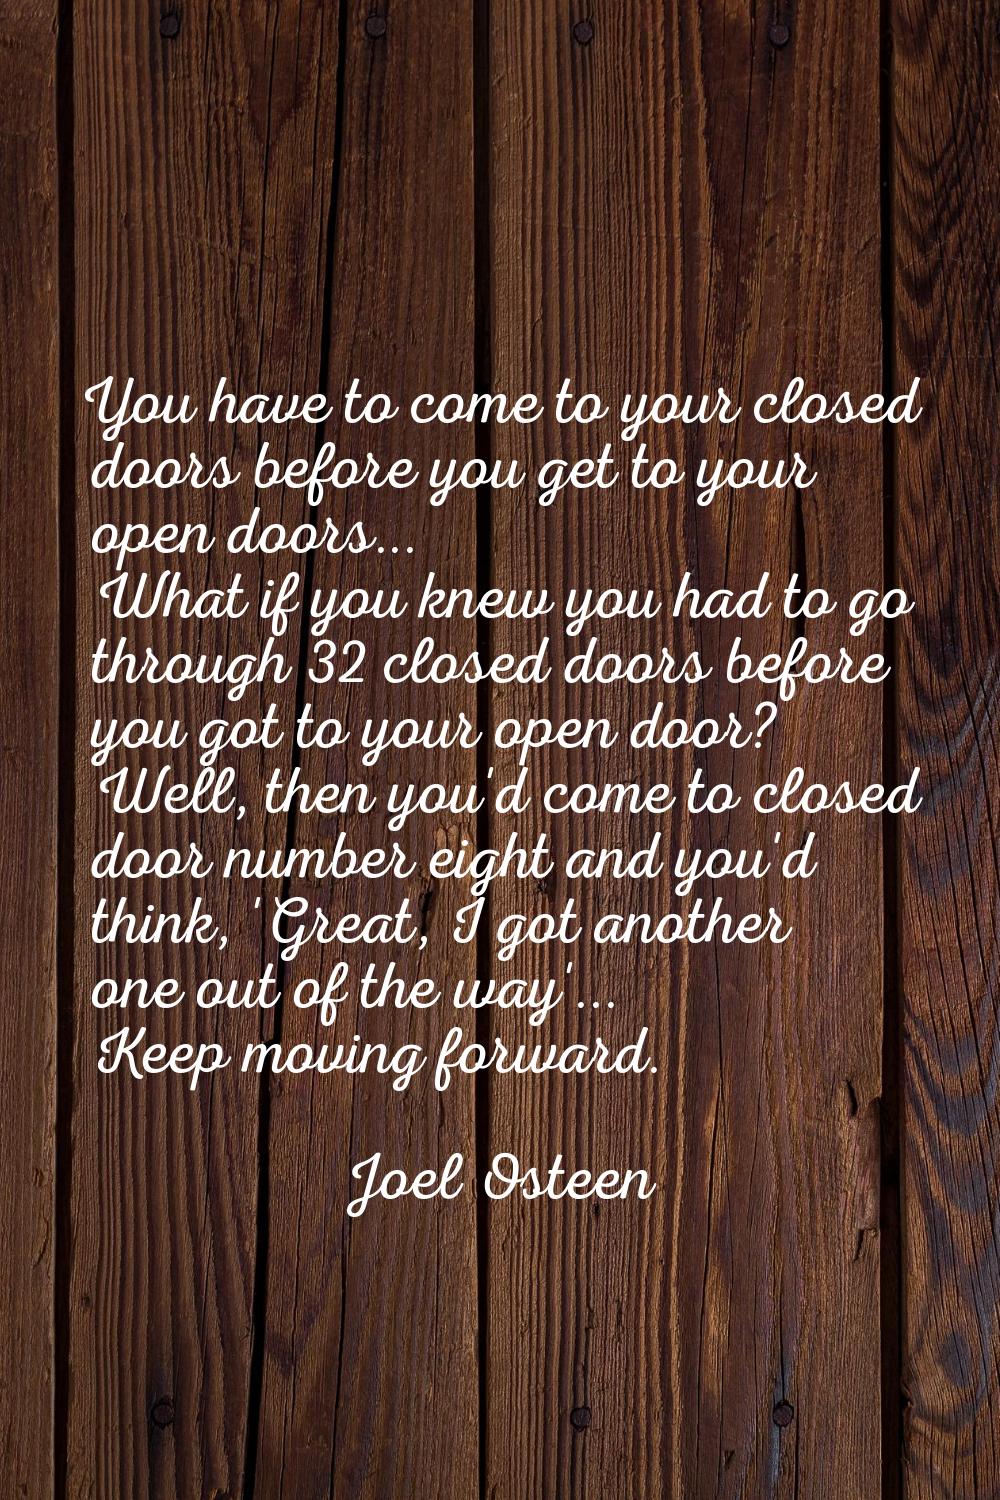 You have to come to your closed doors before you get to your open doors... What if you knew you had